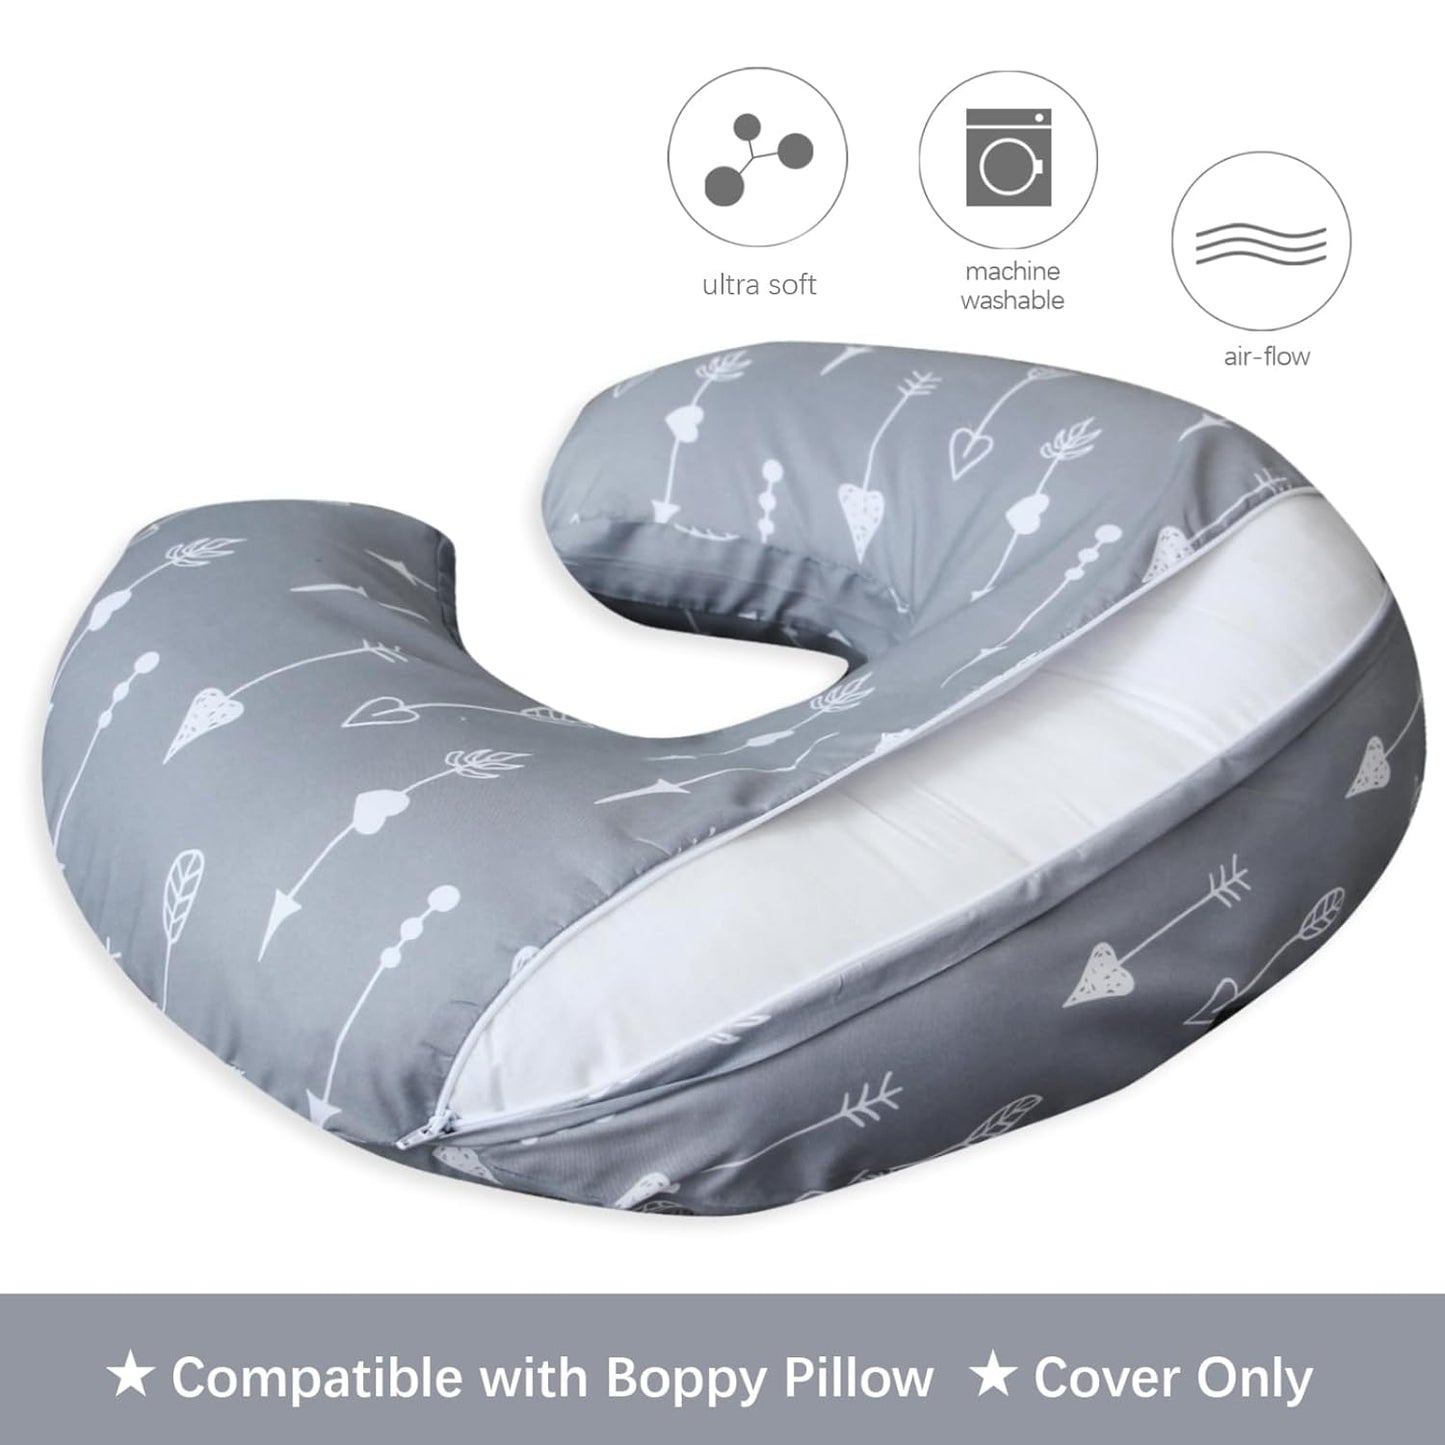 Nursing Pillow Cover for Boppy - 2 Pack, Ultra-soft Microfiber, Breathable & Skin-Friendly, Pink Cloud & Grey Arrow